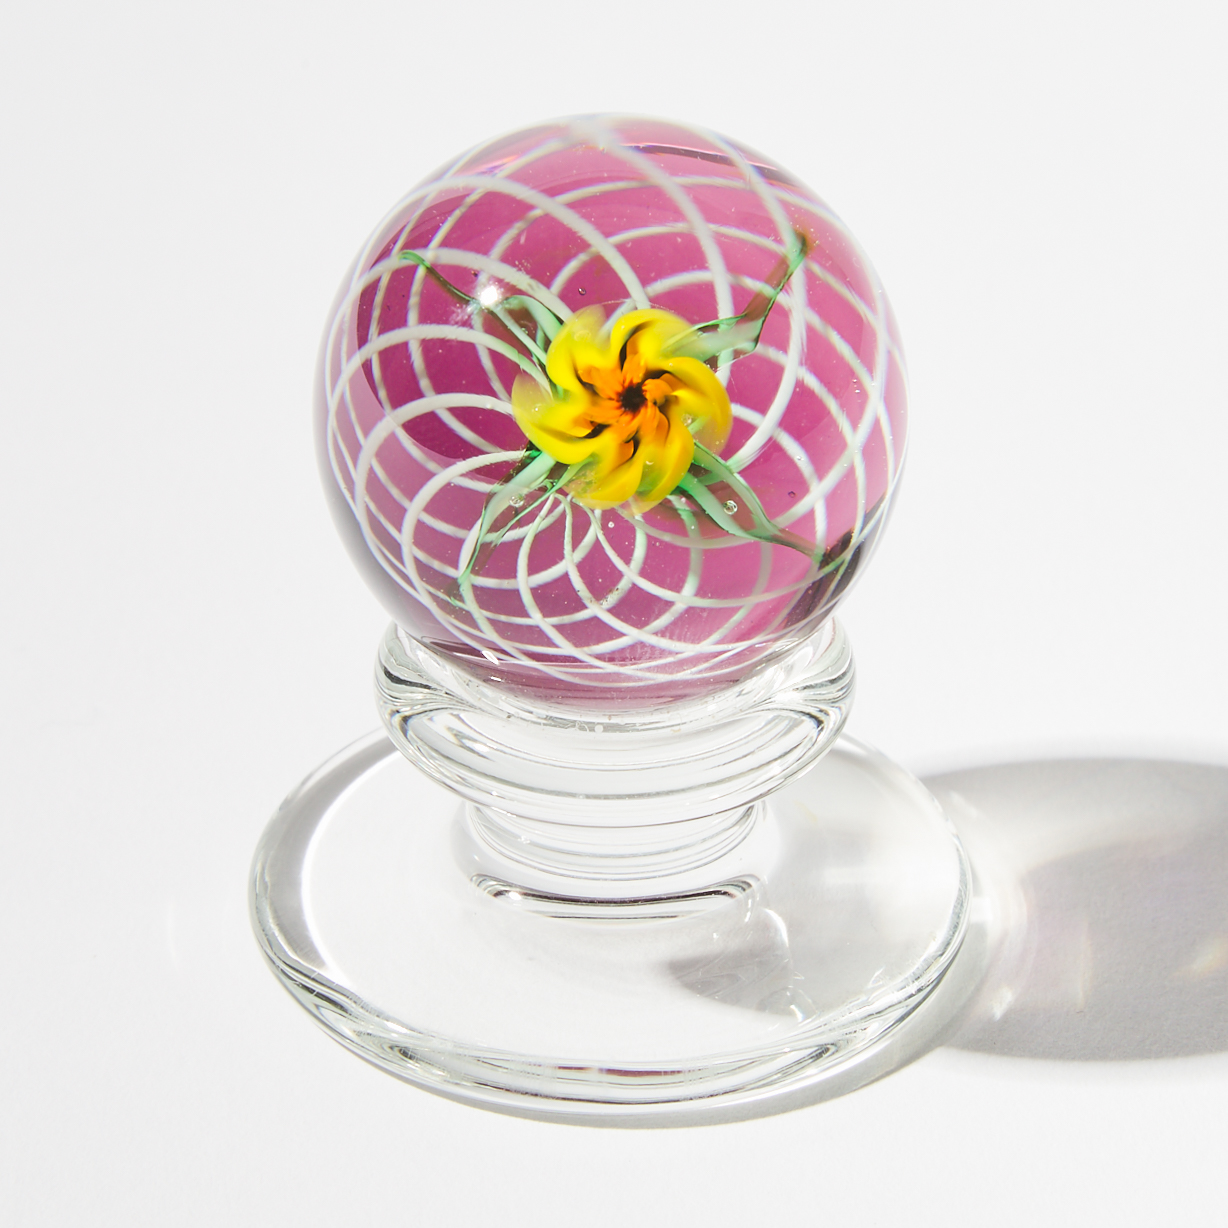 Charles Kaziun Jr. (American, 1919-1992), Small Spider Lily Glass Pedestal Paperweight, 20th century